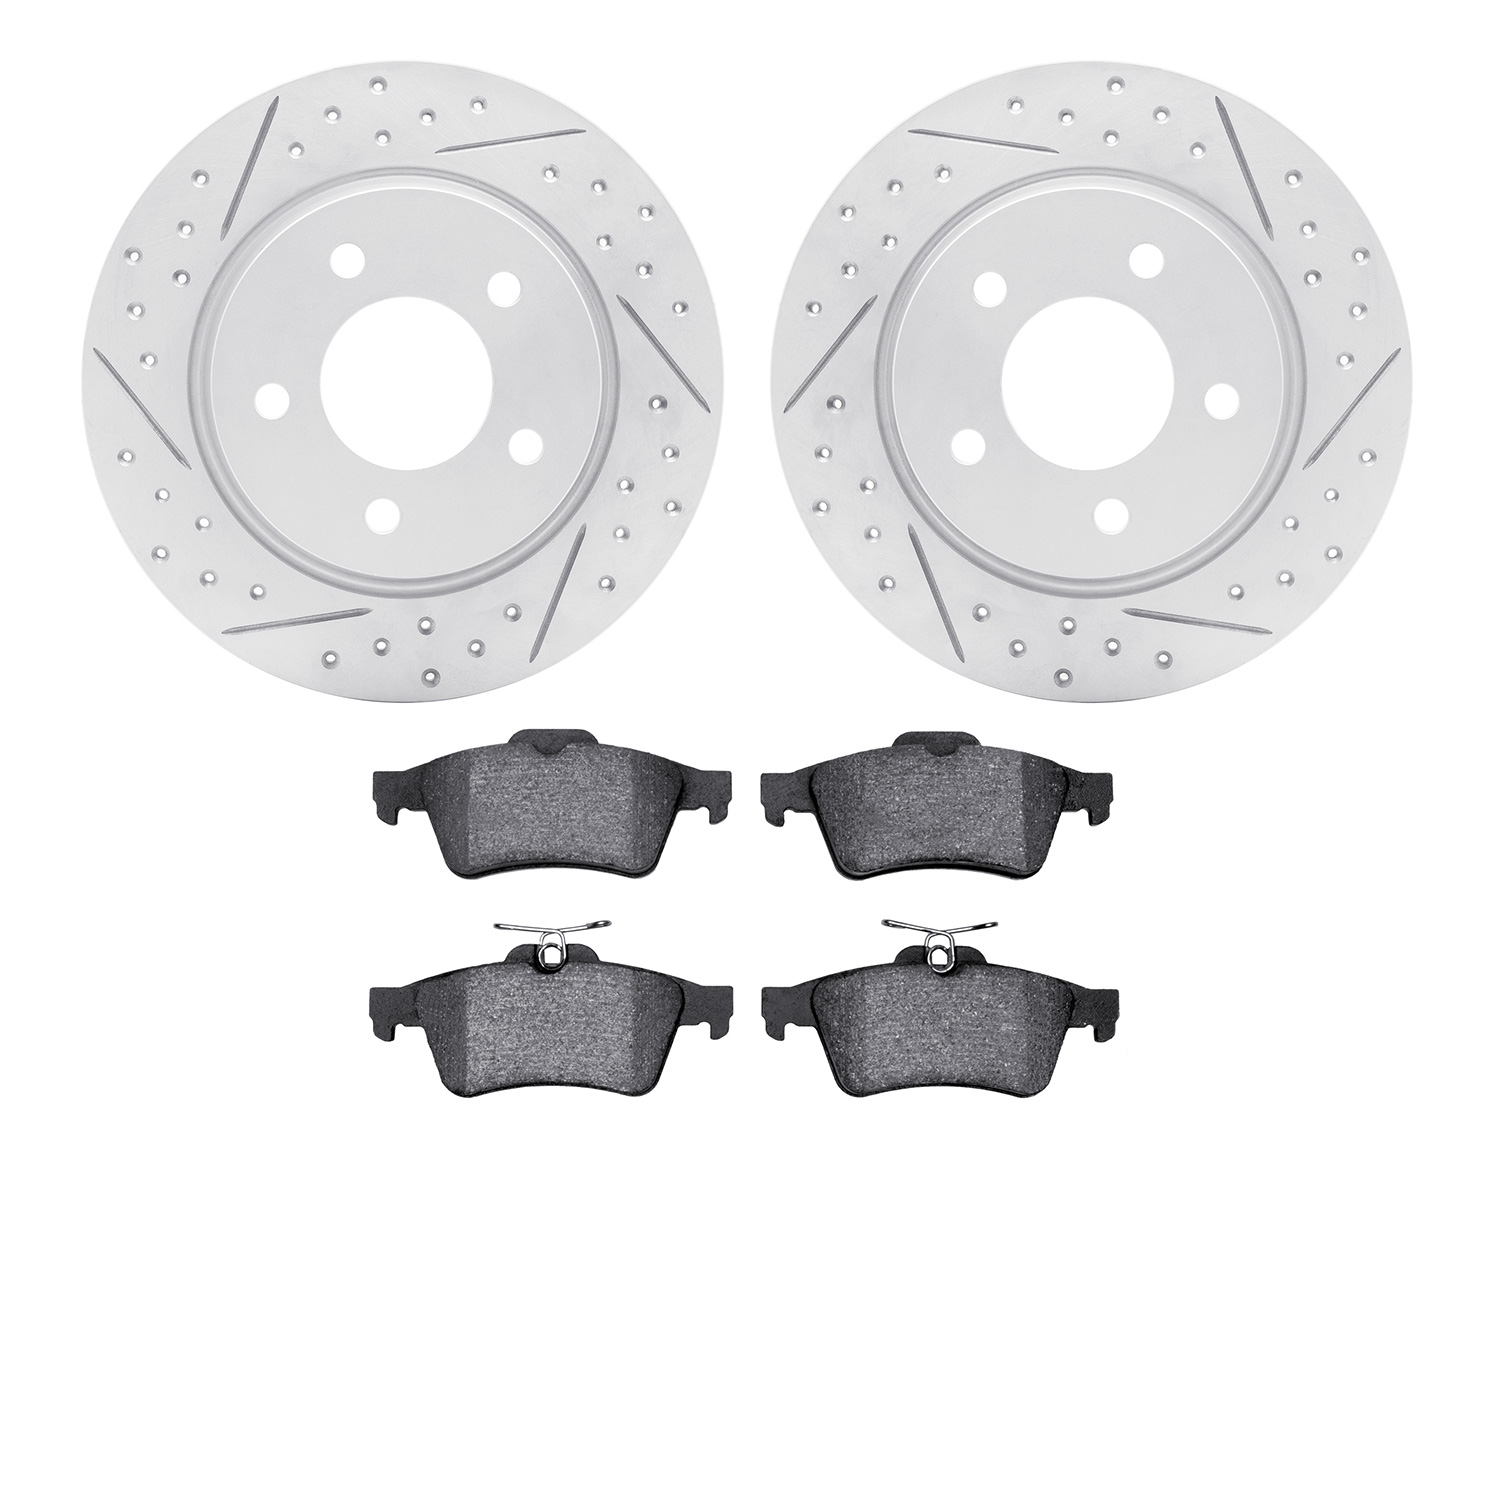 2502-80015 Geoperformance Drilled/Slotted Rotors w/5000 Advanced Brake Pads Kit, 2007-2013 Ford/Lincoln/Mercury/Mazda, Position: